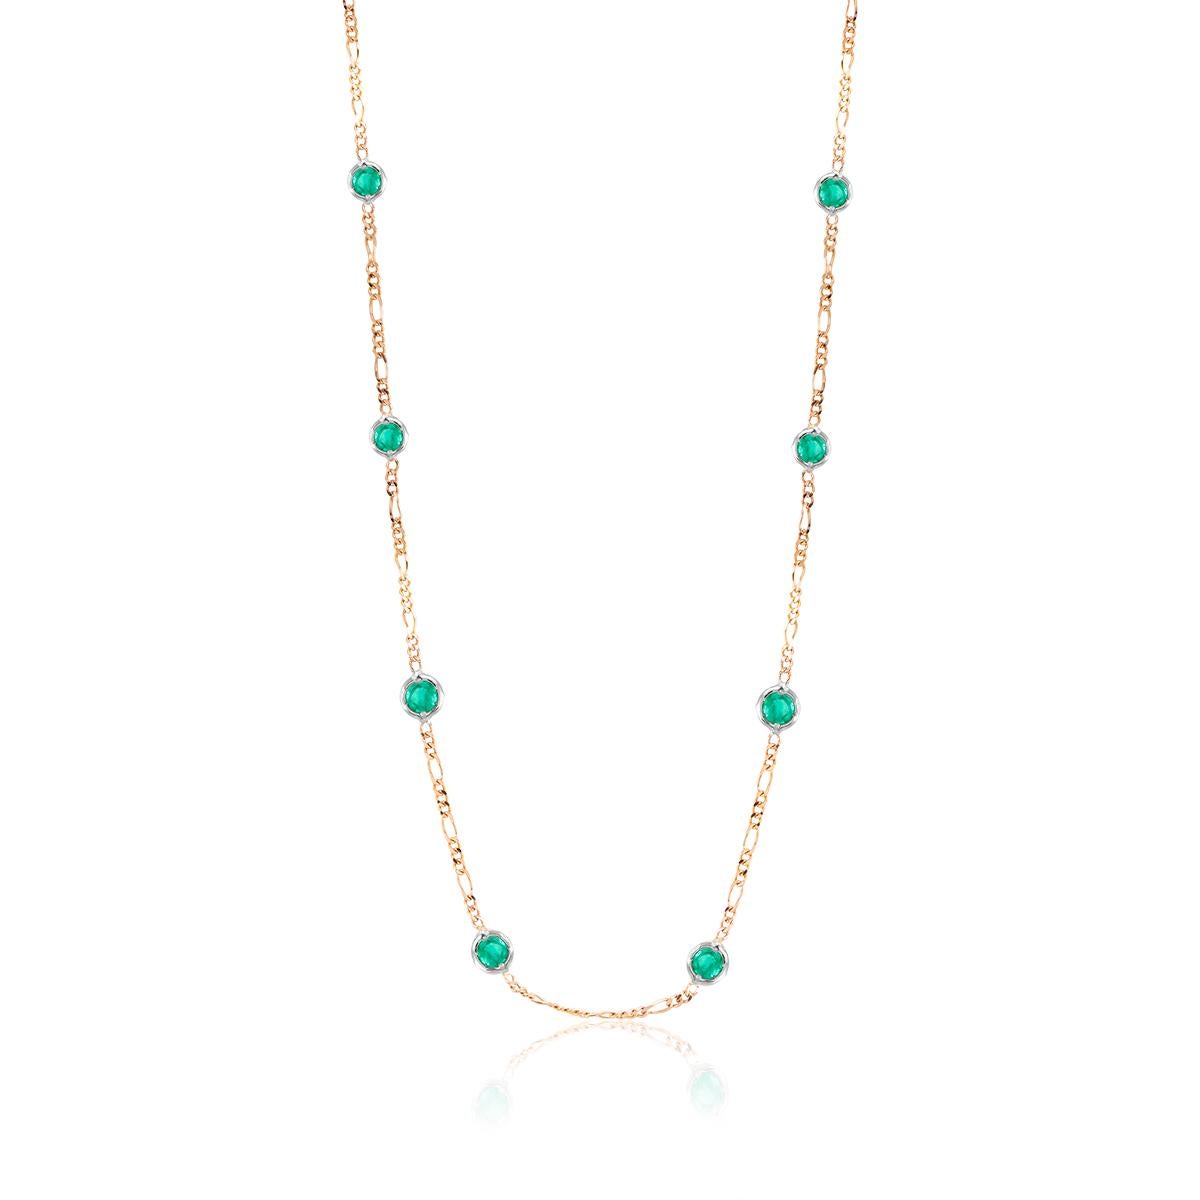 Round Cut Seven Bezel-Set Emerald in Yellow Gold Necklace Weighing 1.15 Carat